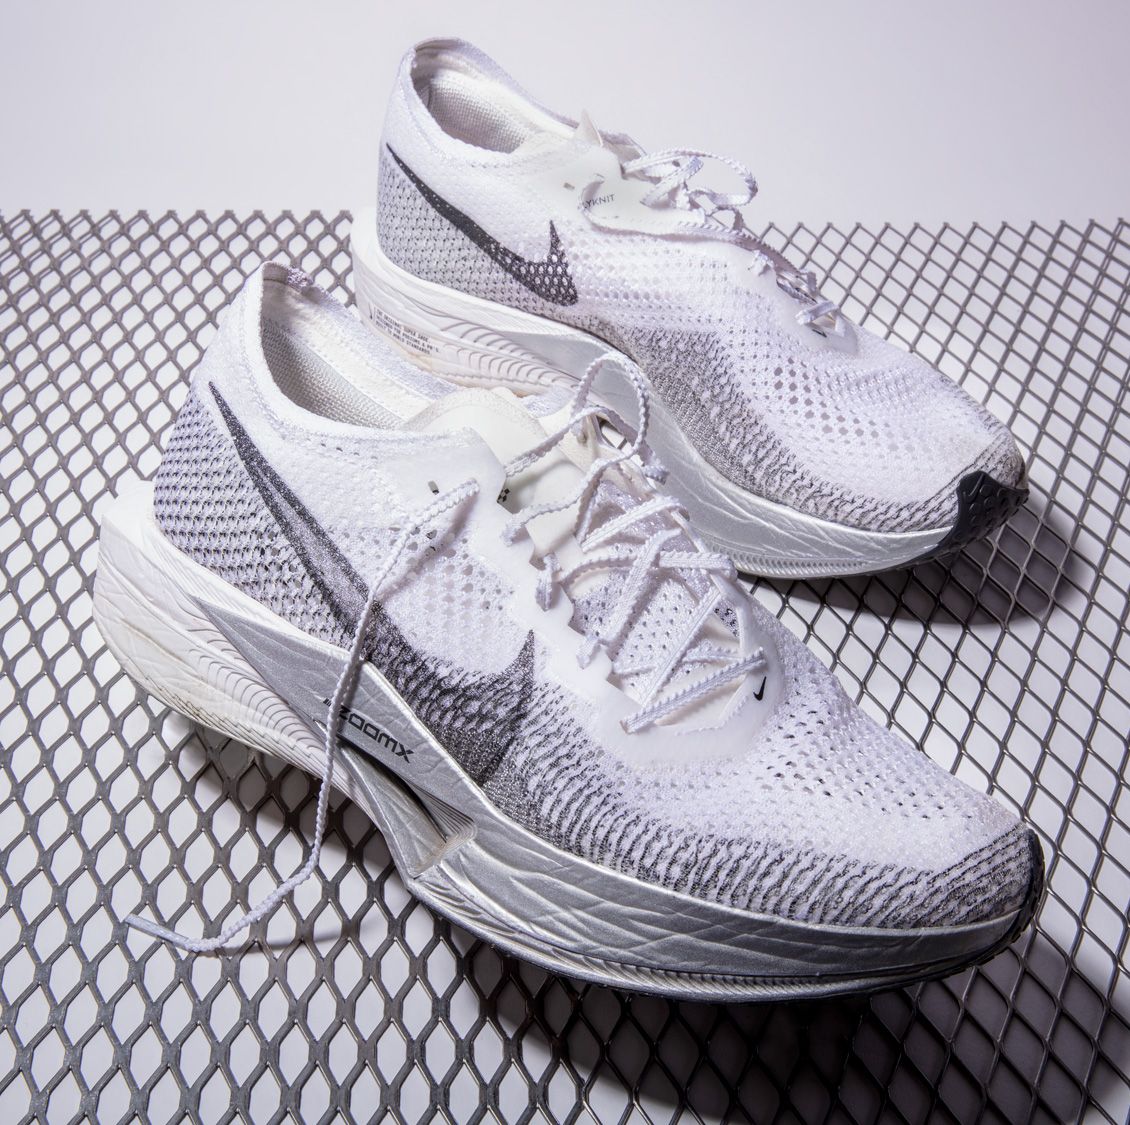 fantoom sirene Lach Nike Vaporfly 3 Review: We Tested the Fastest Marathon Racer